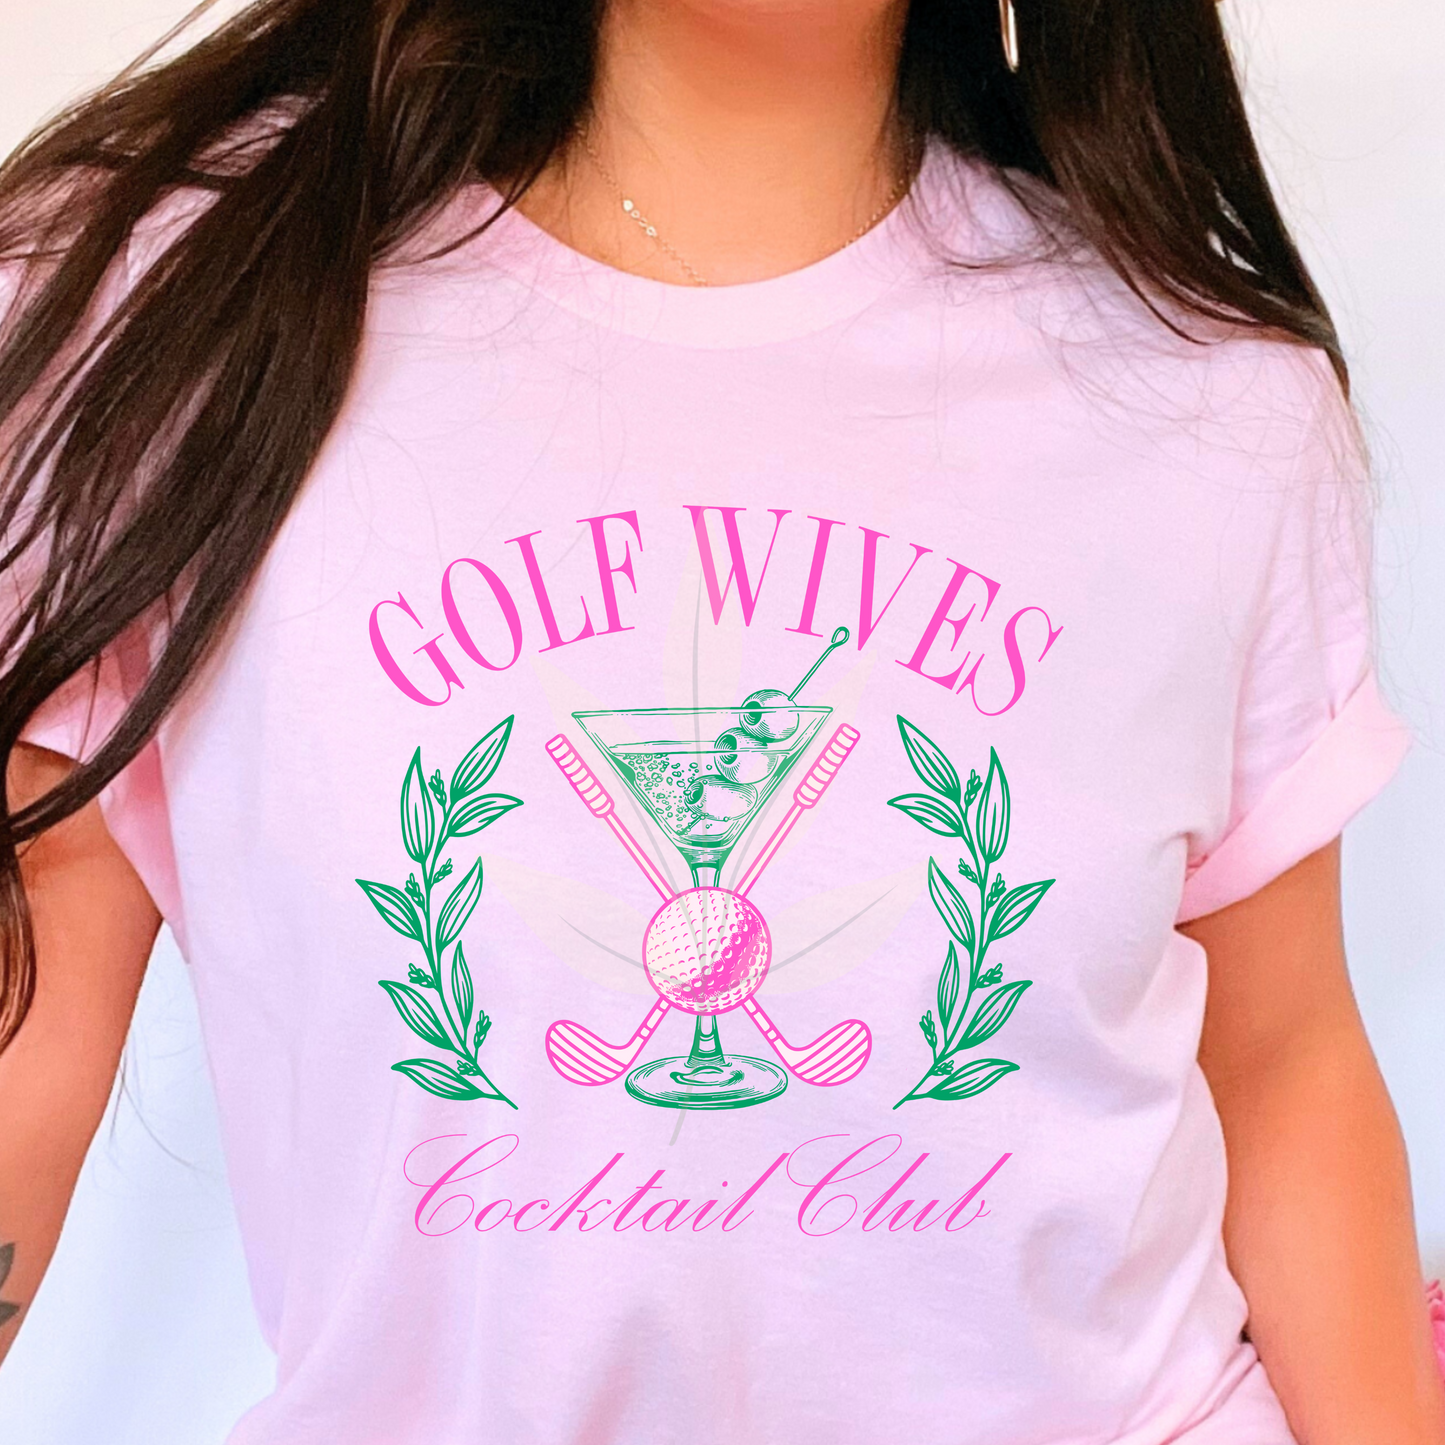 Golf Wives Cocktail Club